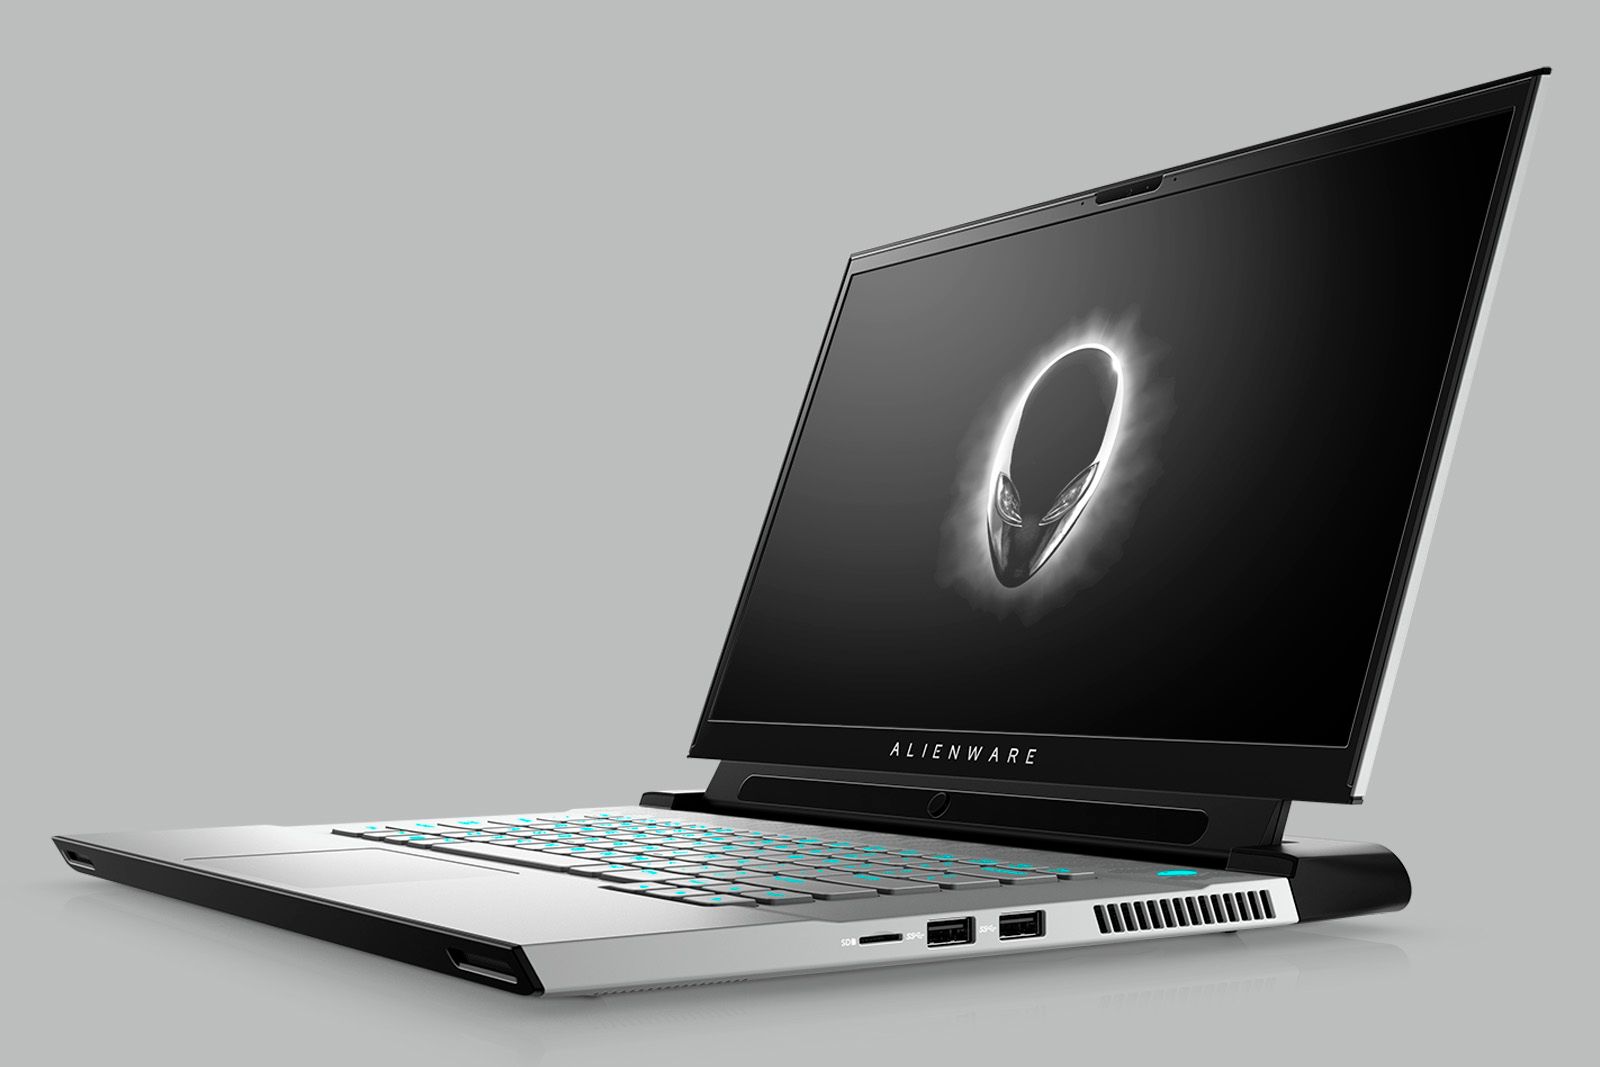 Alienware updates m17 and m15 with Nvidia's new RTX 3000 graphics photo 1